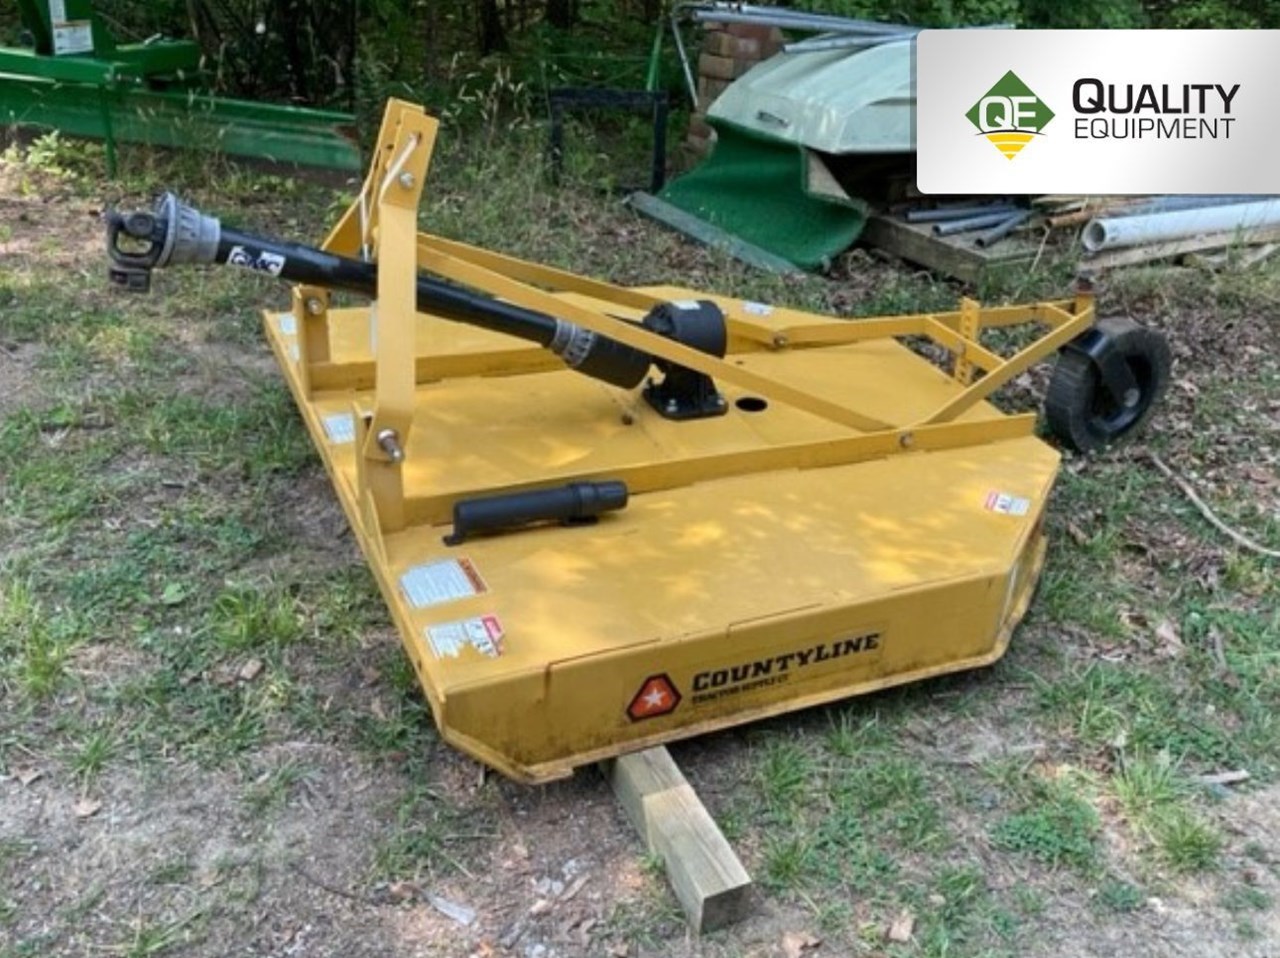  Countyline N/A Rotary Cutter For Sale